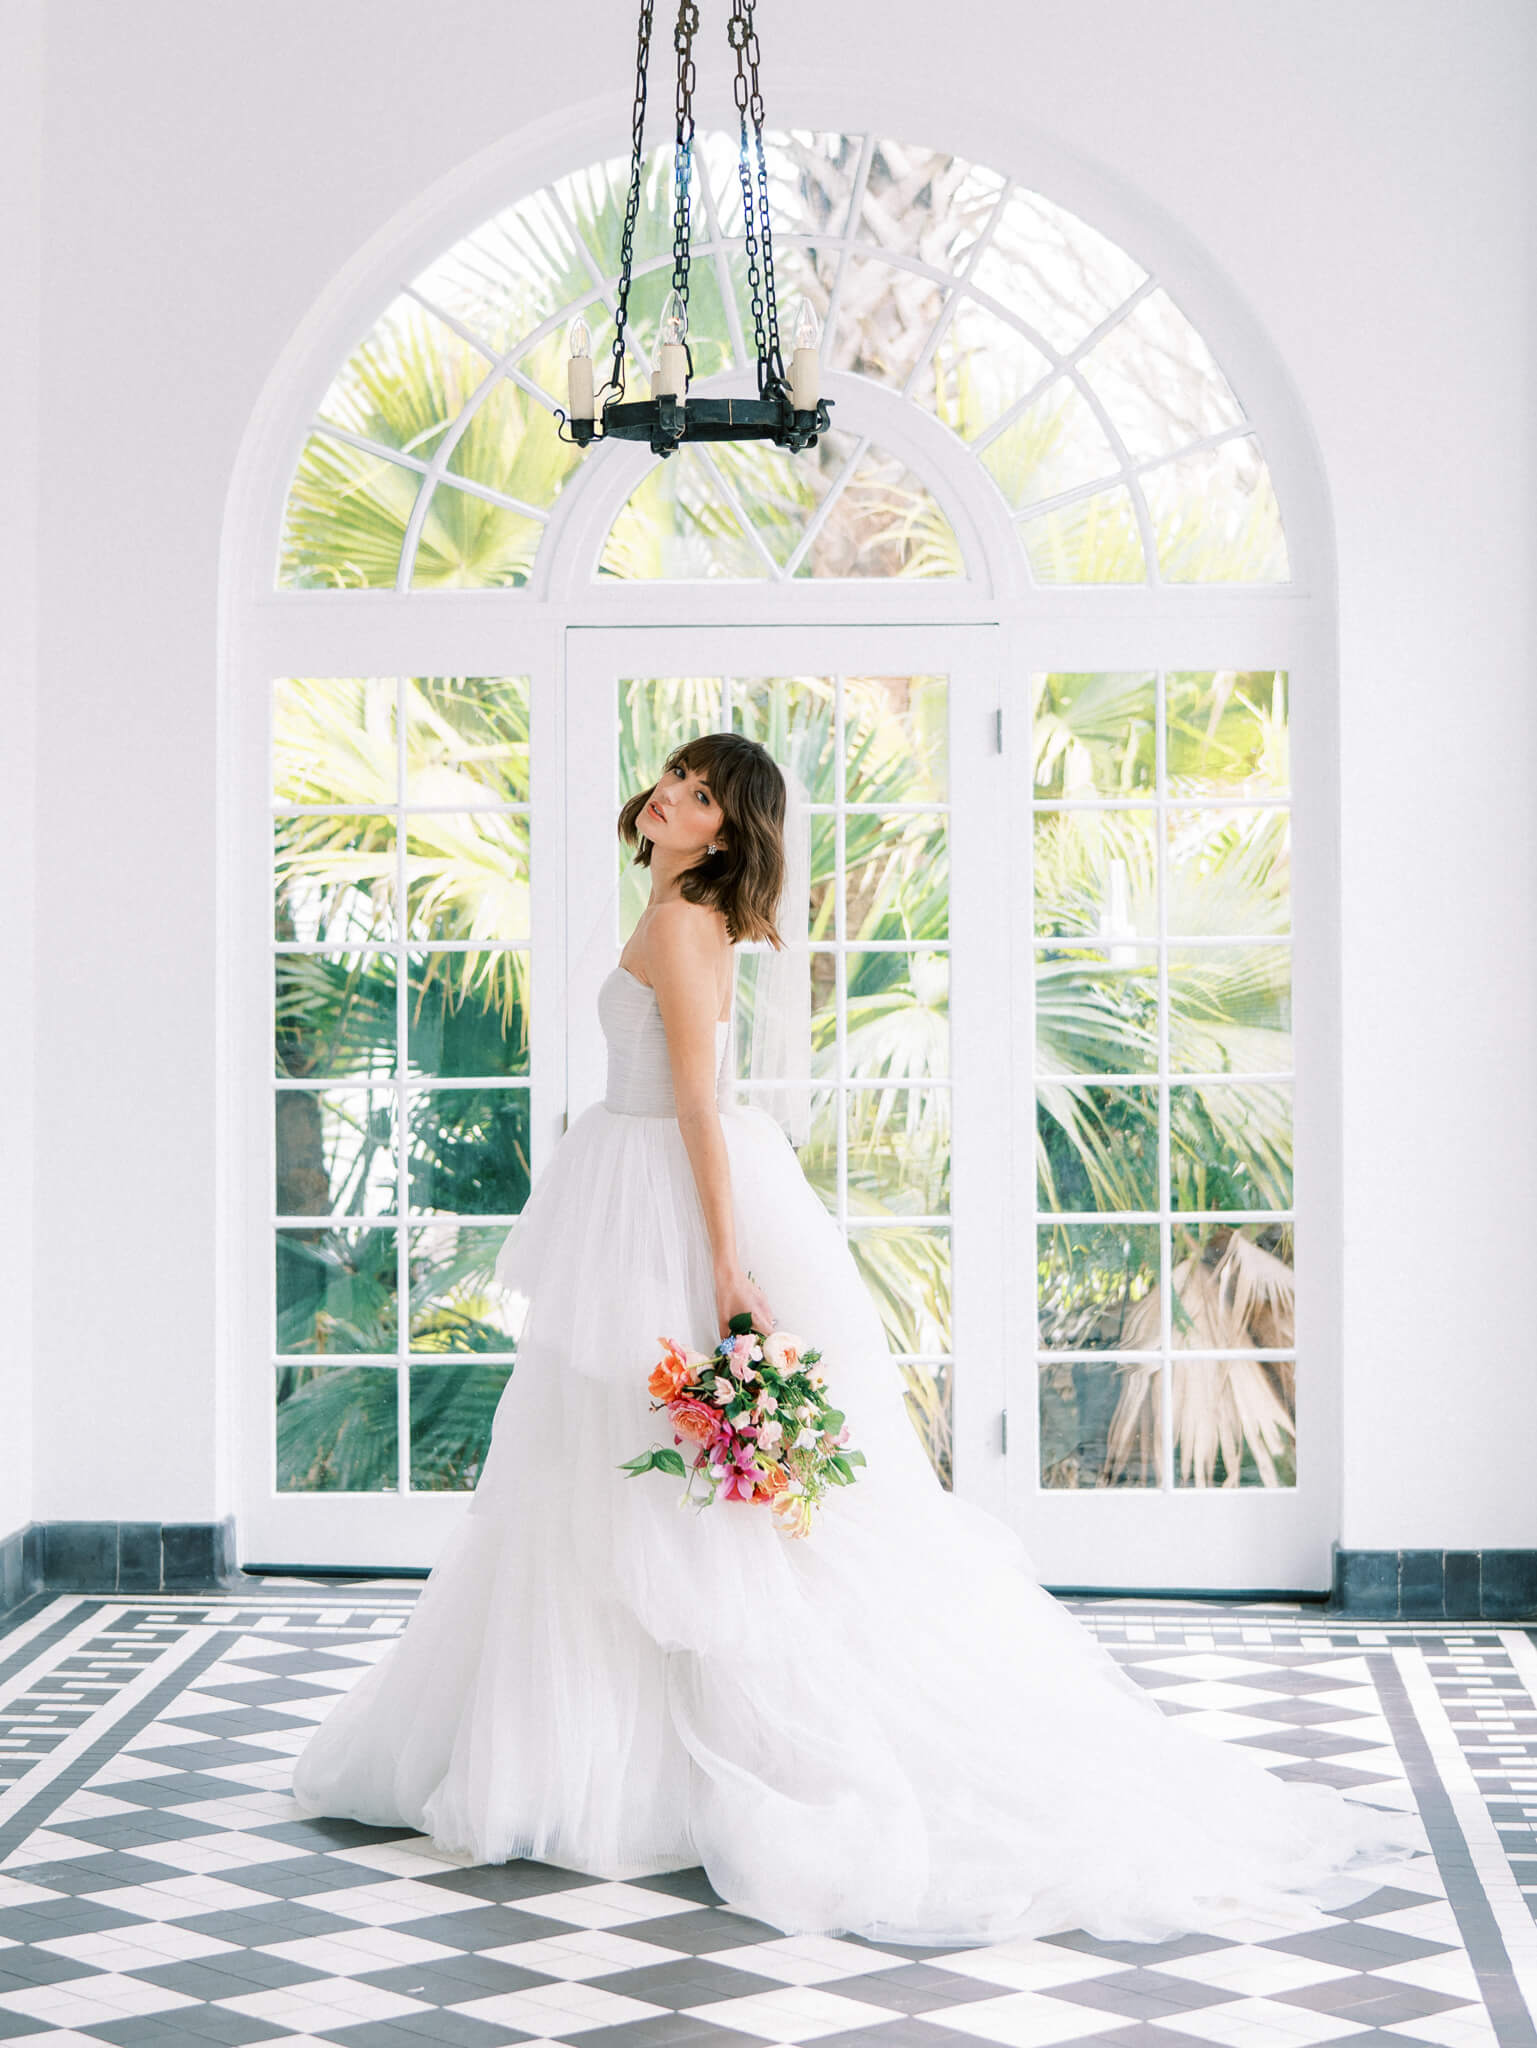 A bride in a tulle gown holding a bouquet of bright flowers standing on a checkered black and white floor in front of an arched window.